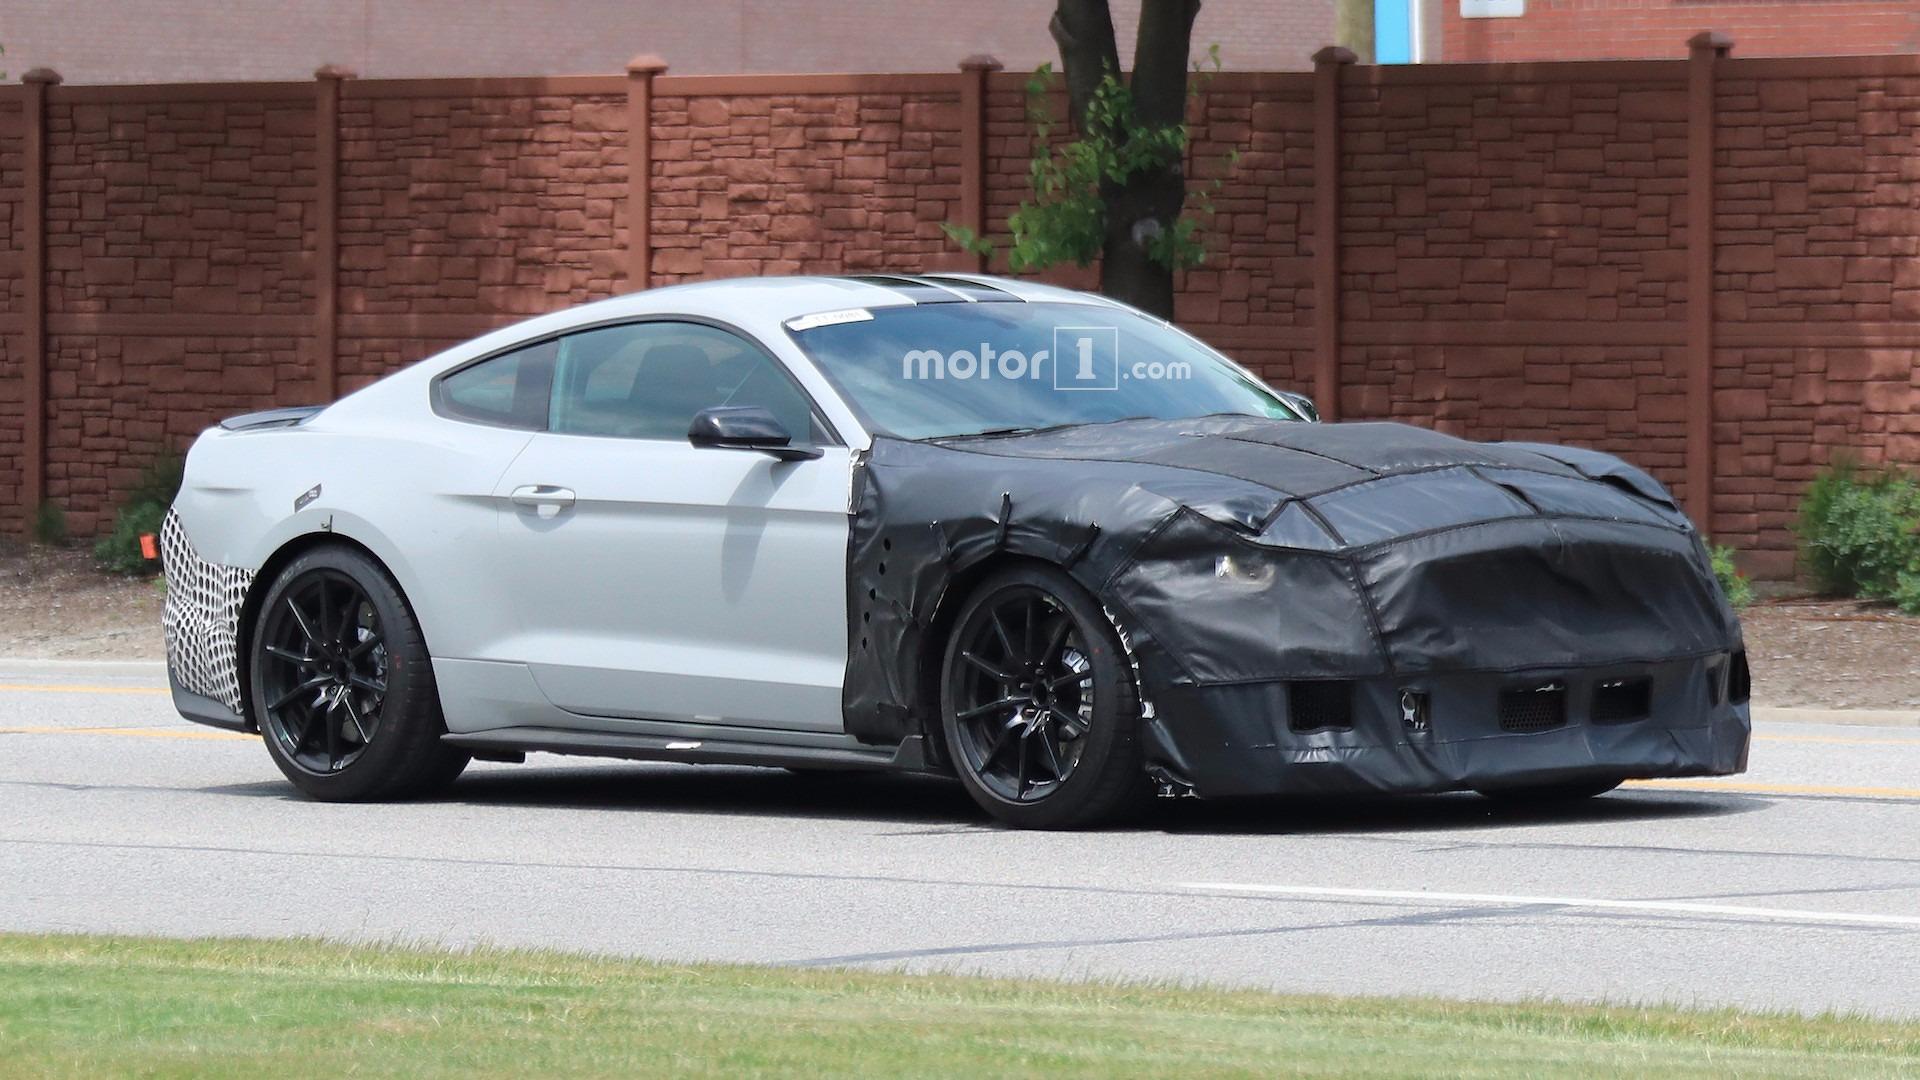 2019 Shelby Mustang GT500 Could Debut Next Month In Chicago